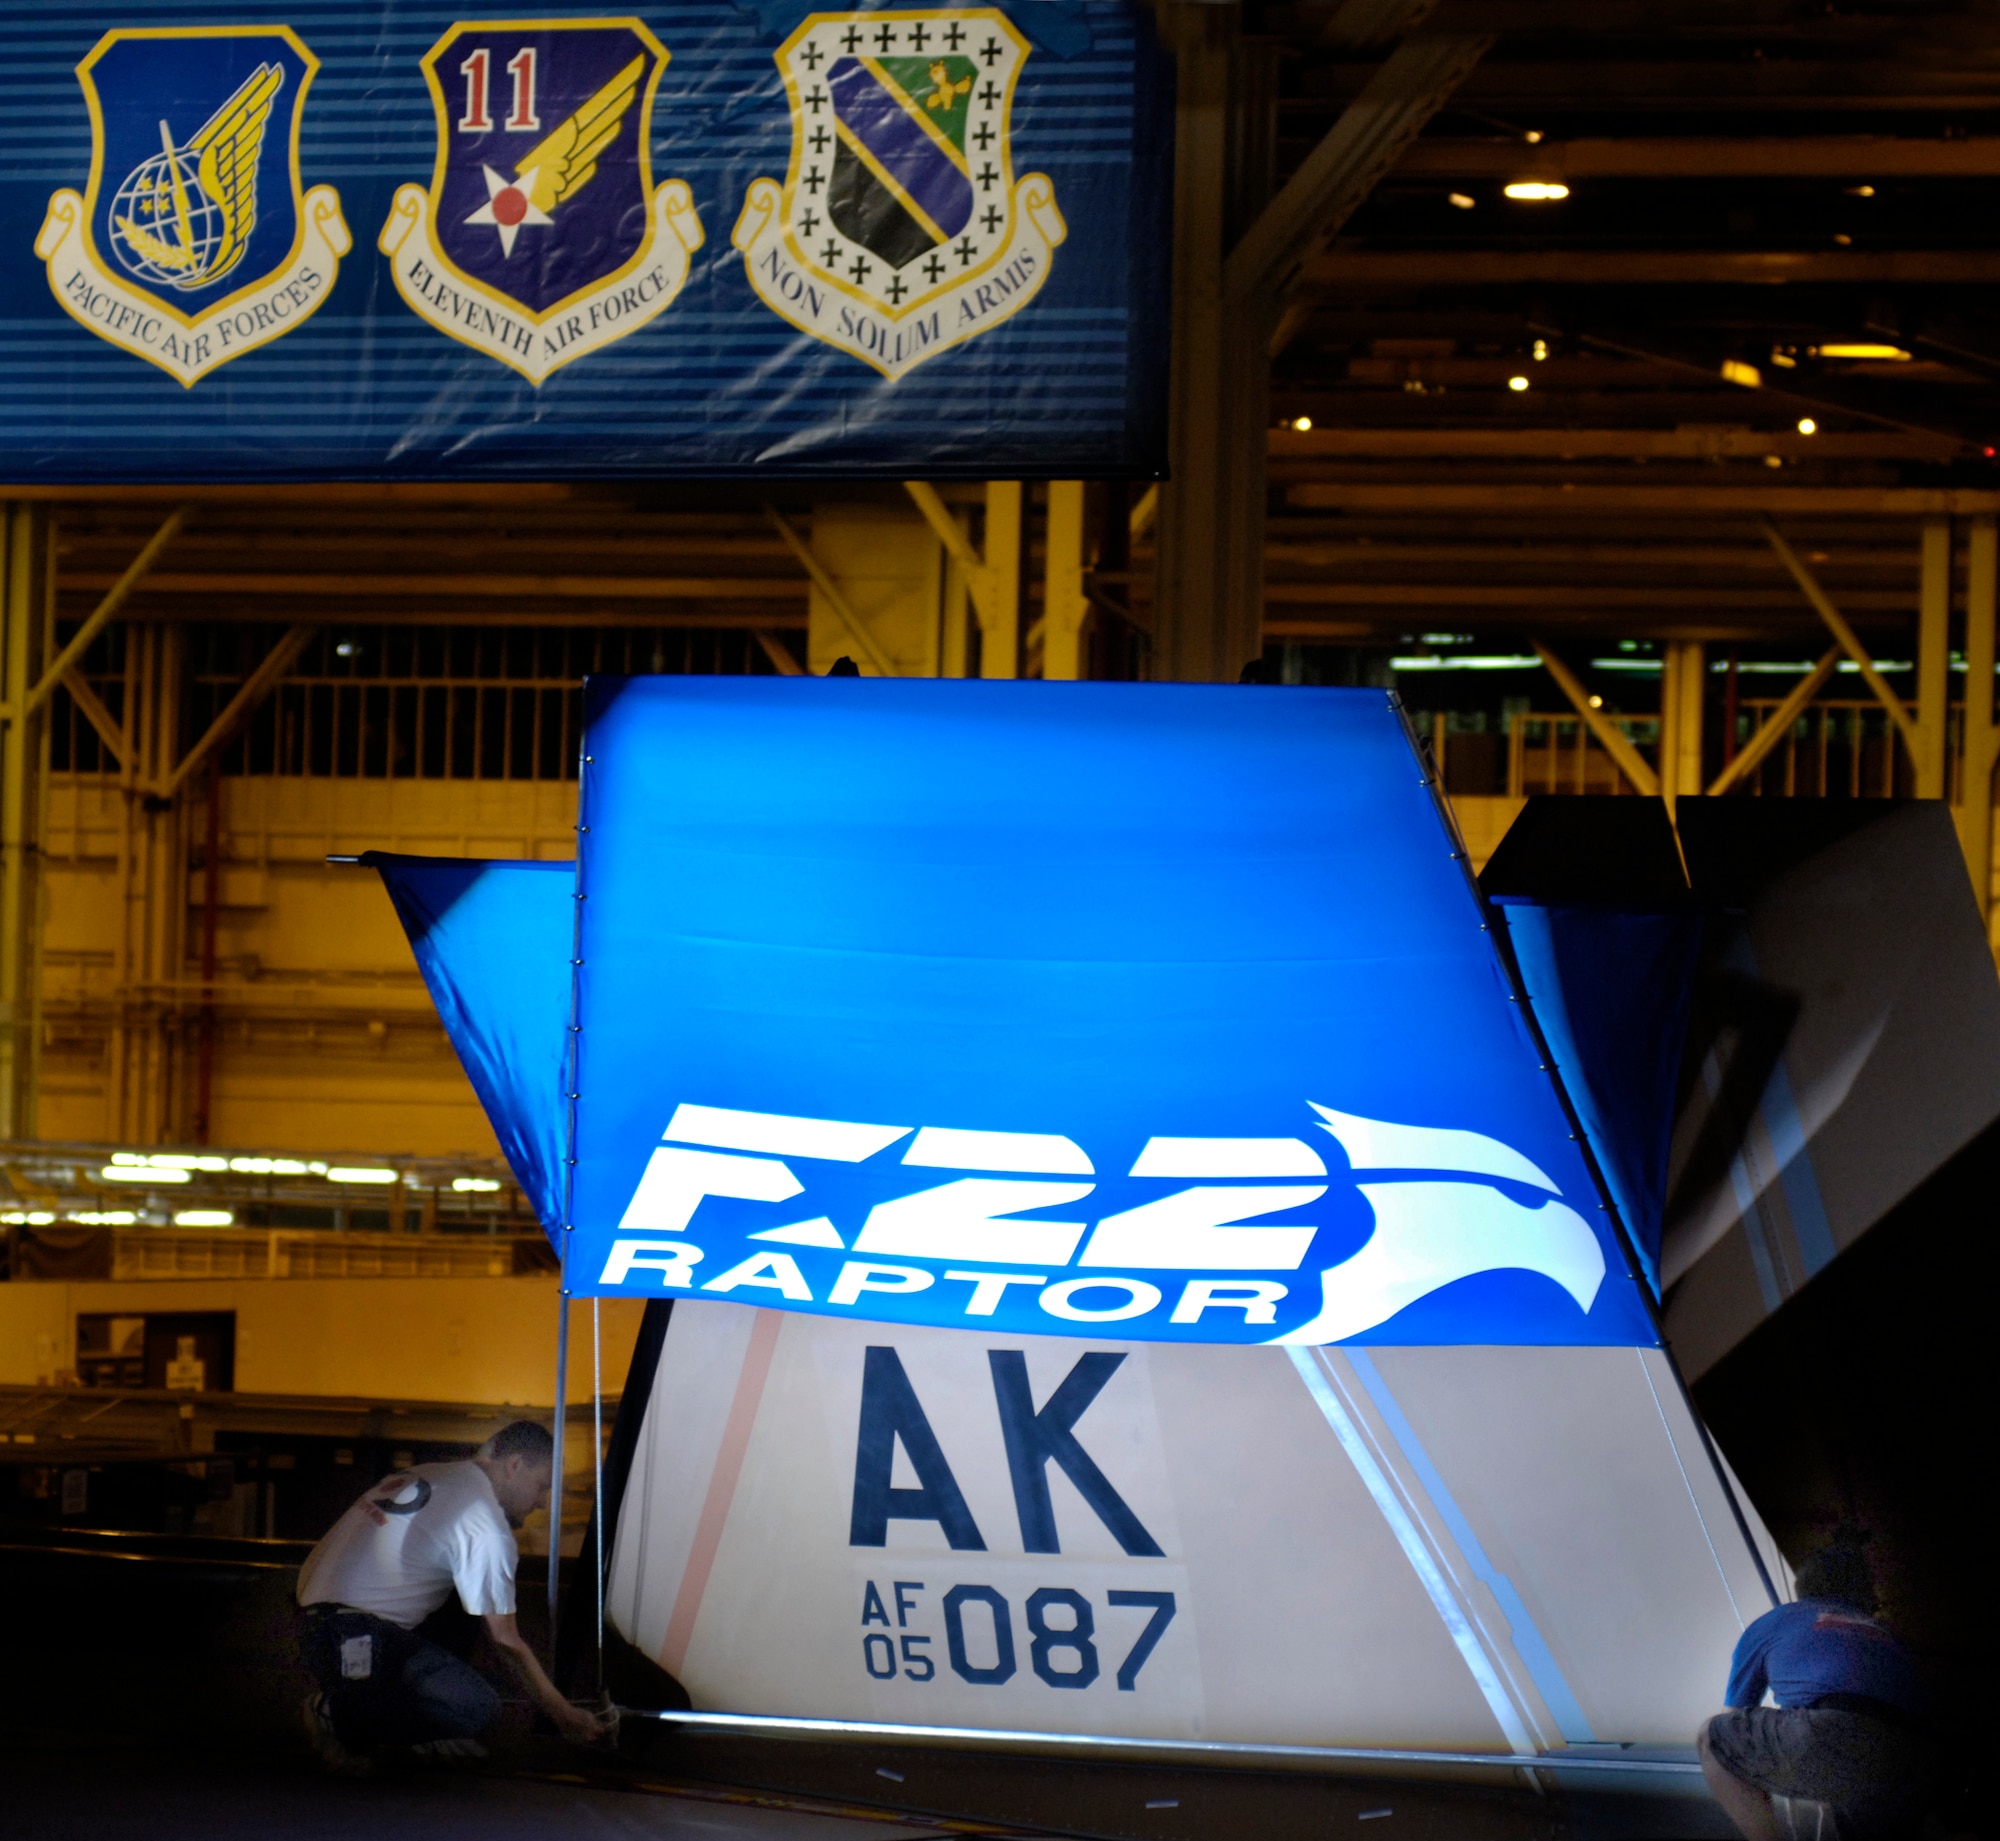 The tail section of an F-22 Raptor being assigned to Pacific Air Forces is prepared for an unveiling ceremony Aug 3 at the Lockheed Plant in Marietta, Ga.  The aircraft, which is still under construction, will be the first of 36 F-22s assigned to Elmendorf Air Force Base, Alaska, beginning next year.  (Courtesy photo/John Rossino)